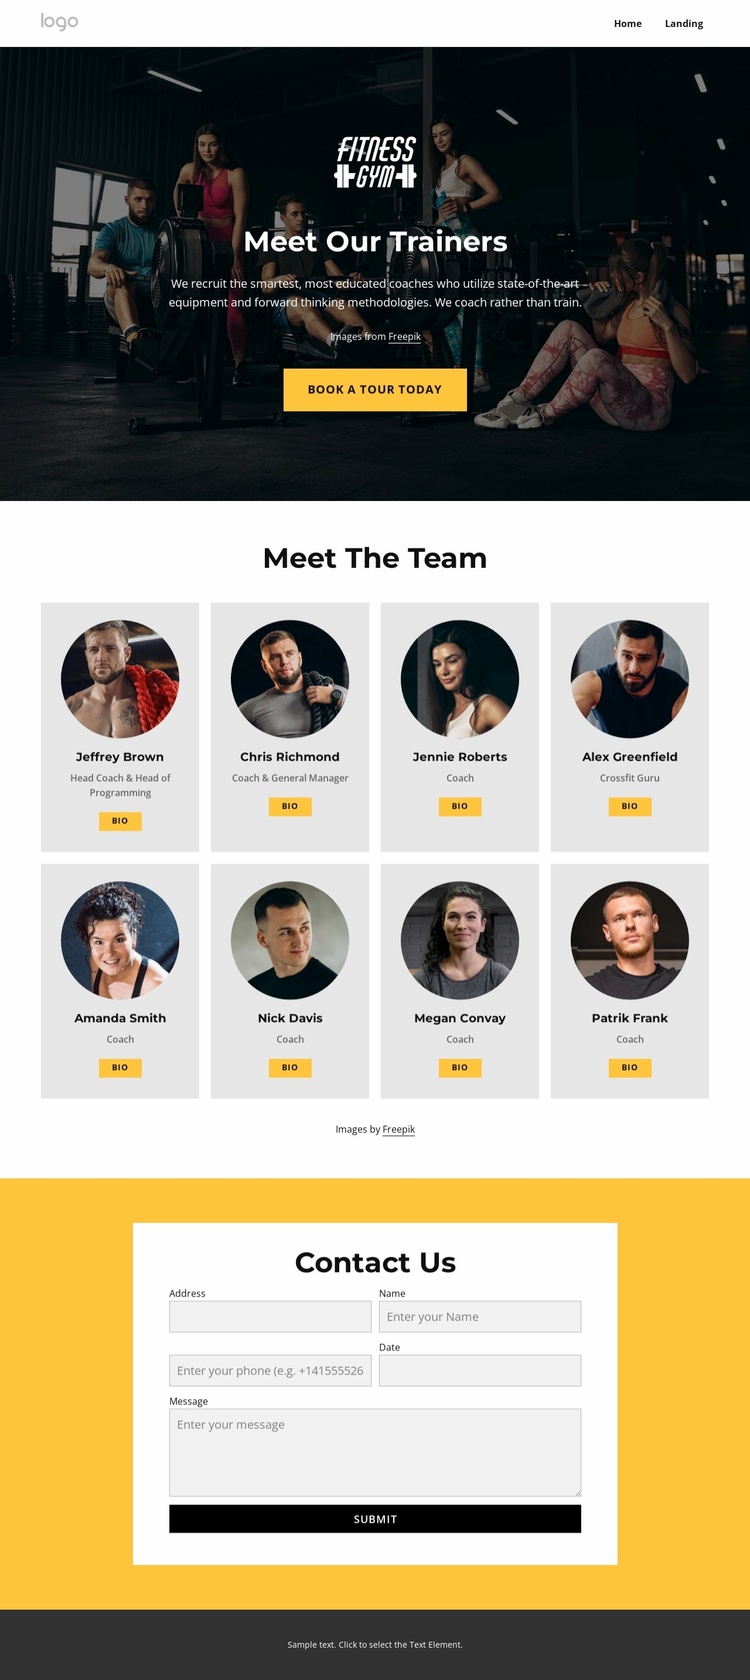 Meet our trainers Website Template